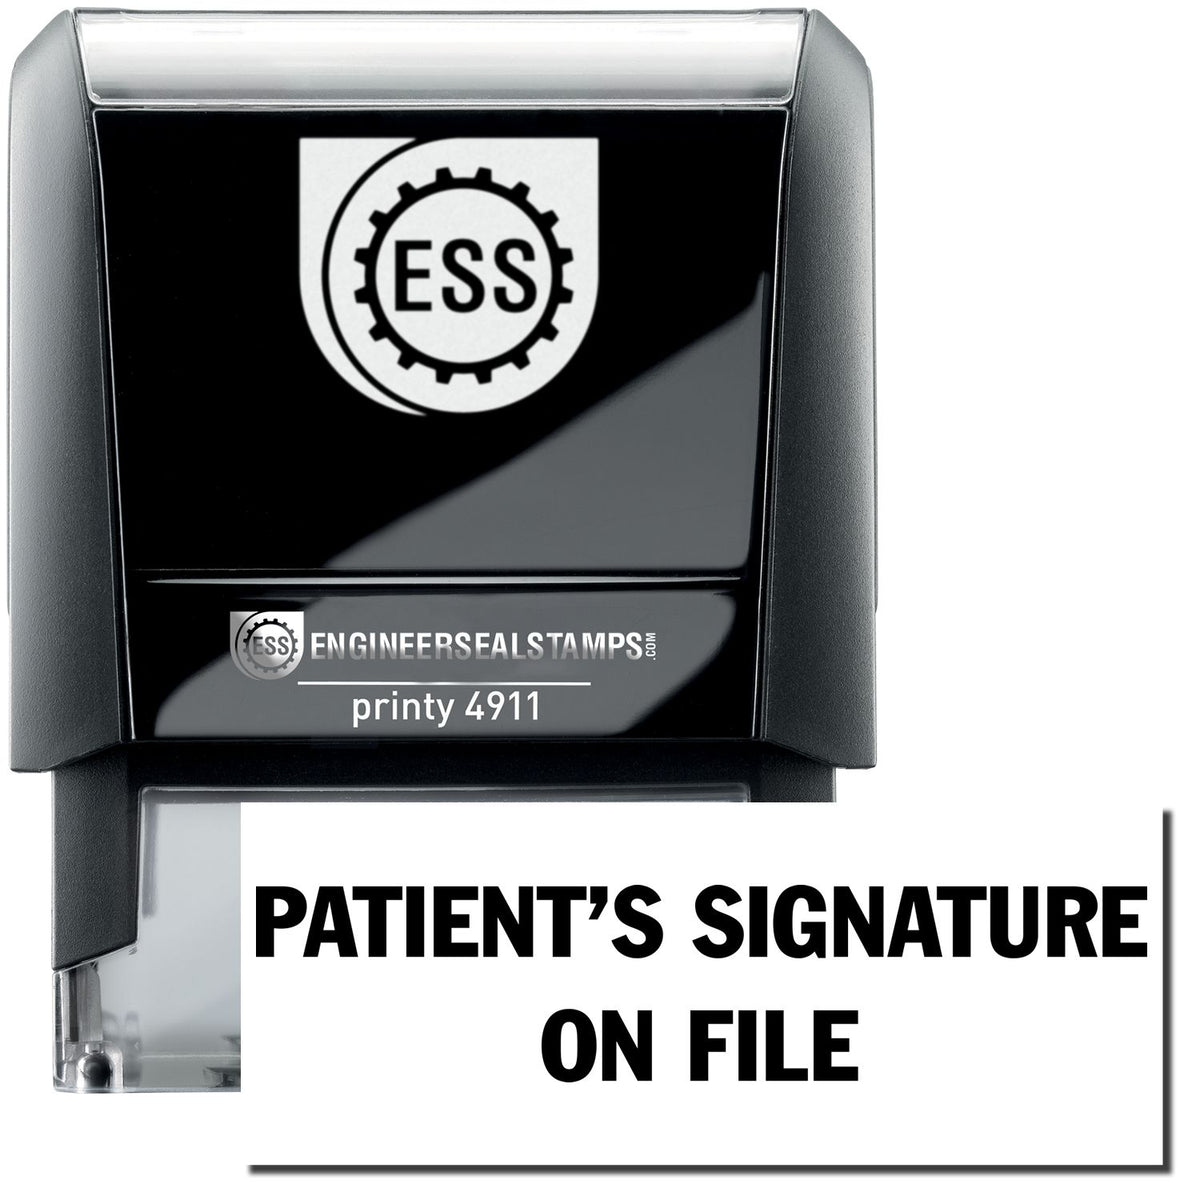 A self-inking stamp with a stamped image showing how the text &quot;PATIENT&#39;S SIGNATURE ON FILE&quot; is displayed after stamping.